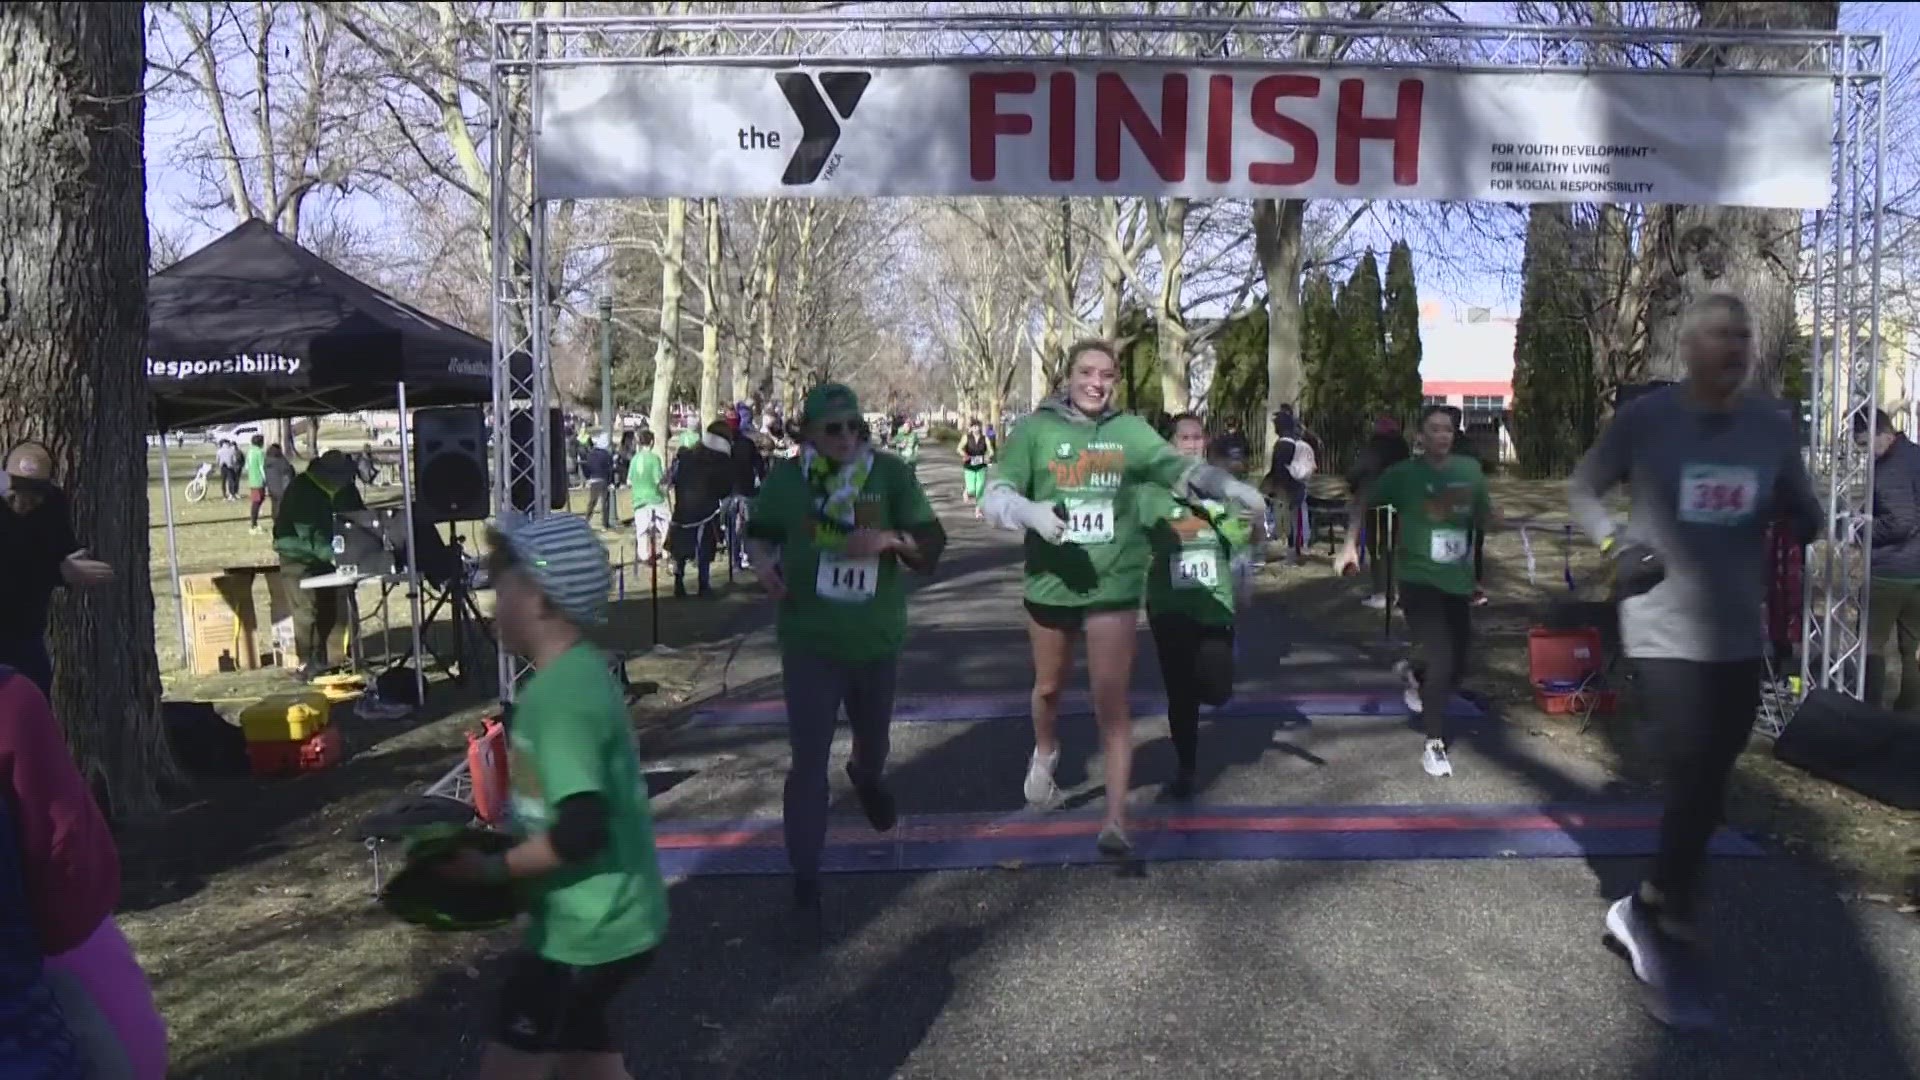 Saturday's event included three different races; the Leprechaun Mile for kids and adults, a 5K and a 5-mile course.